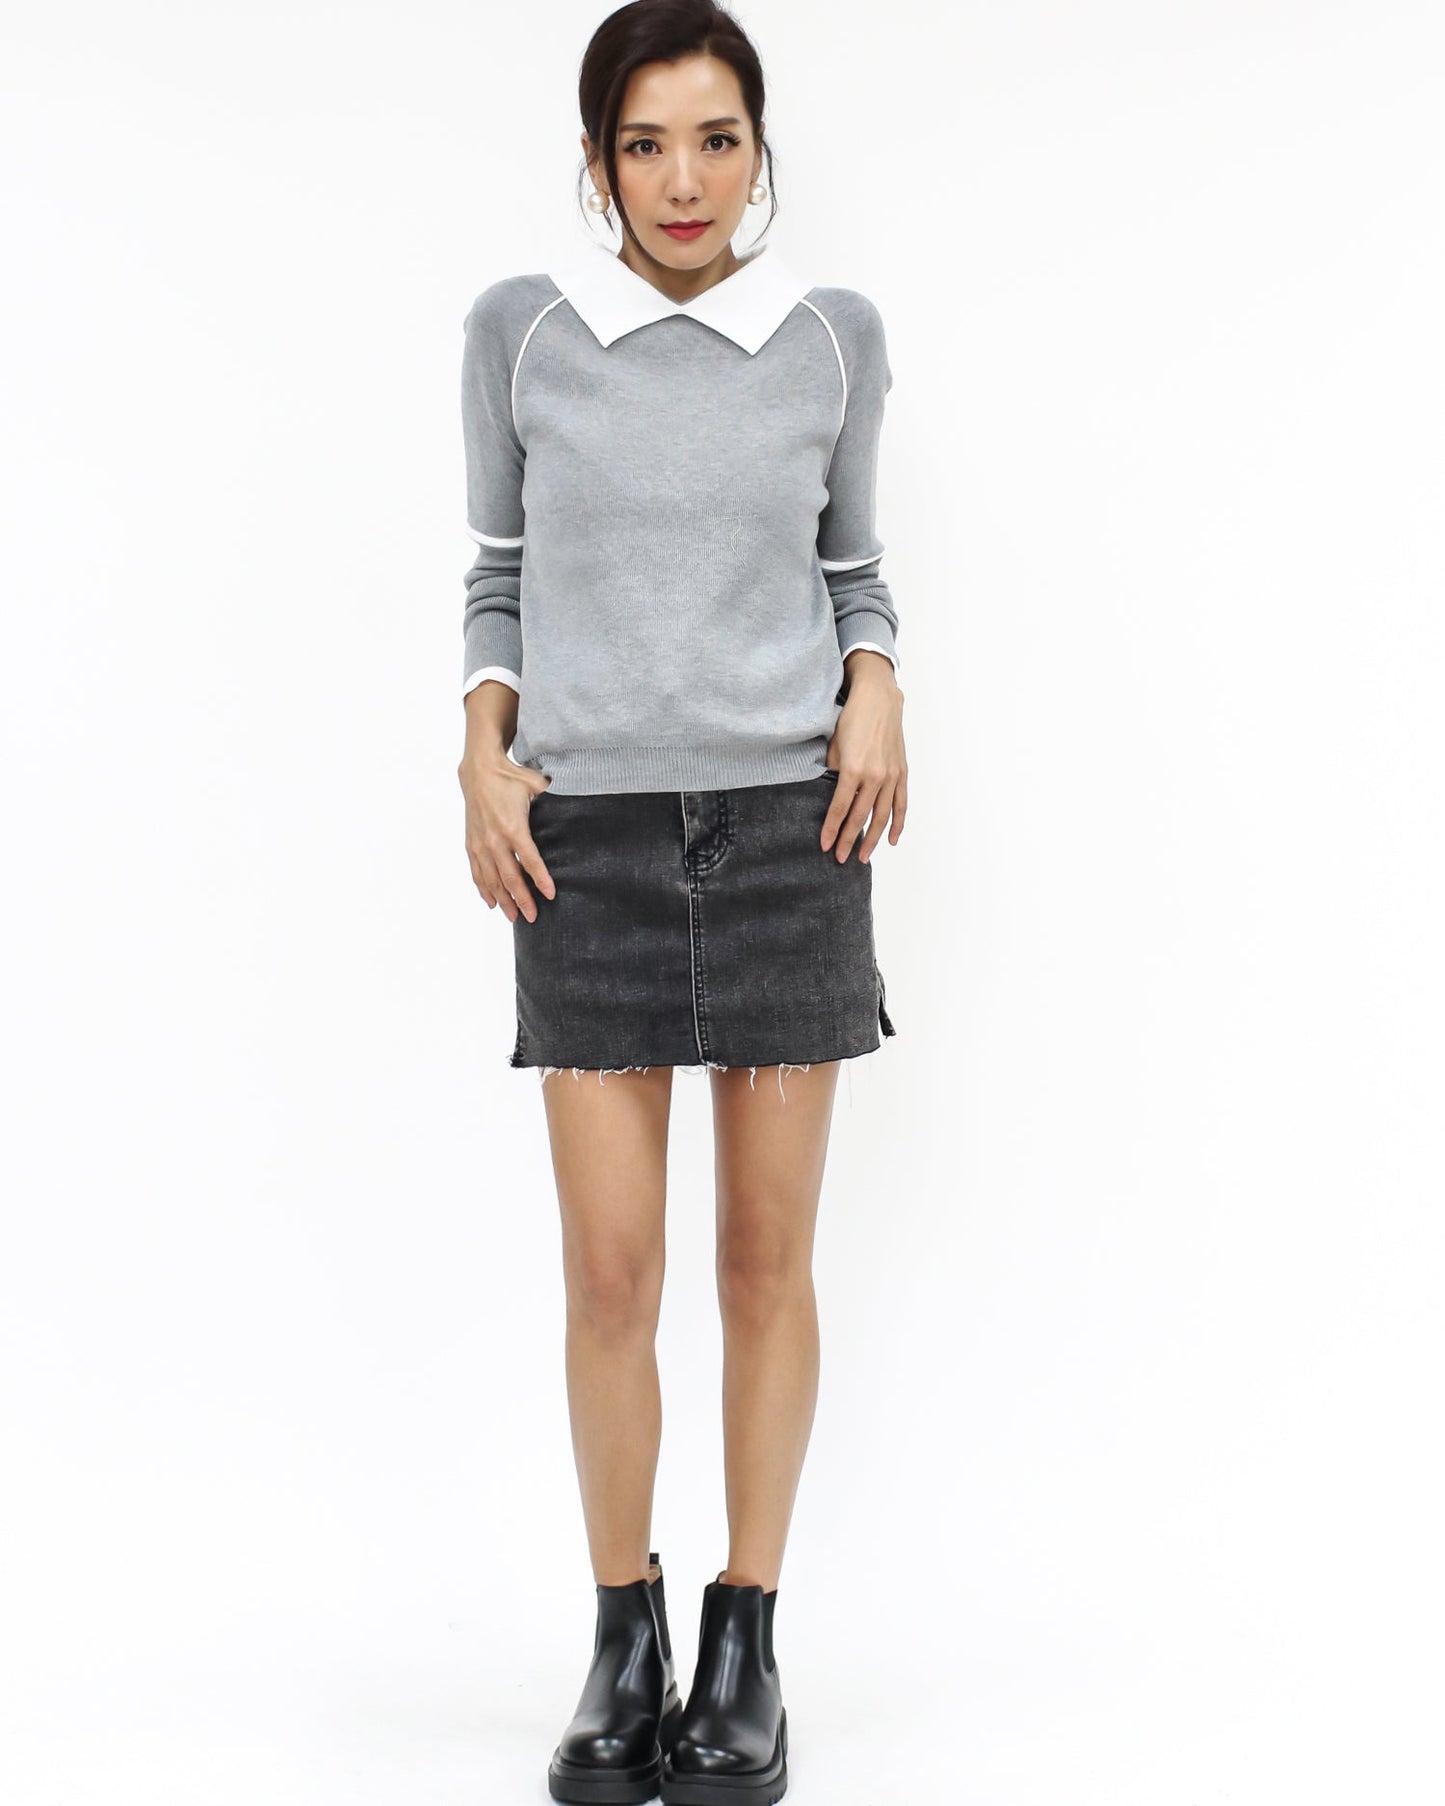 grey & ivory collar knitted top *pre-order*